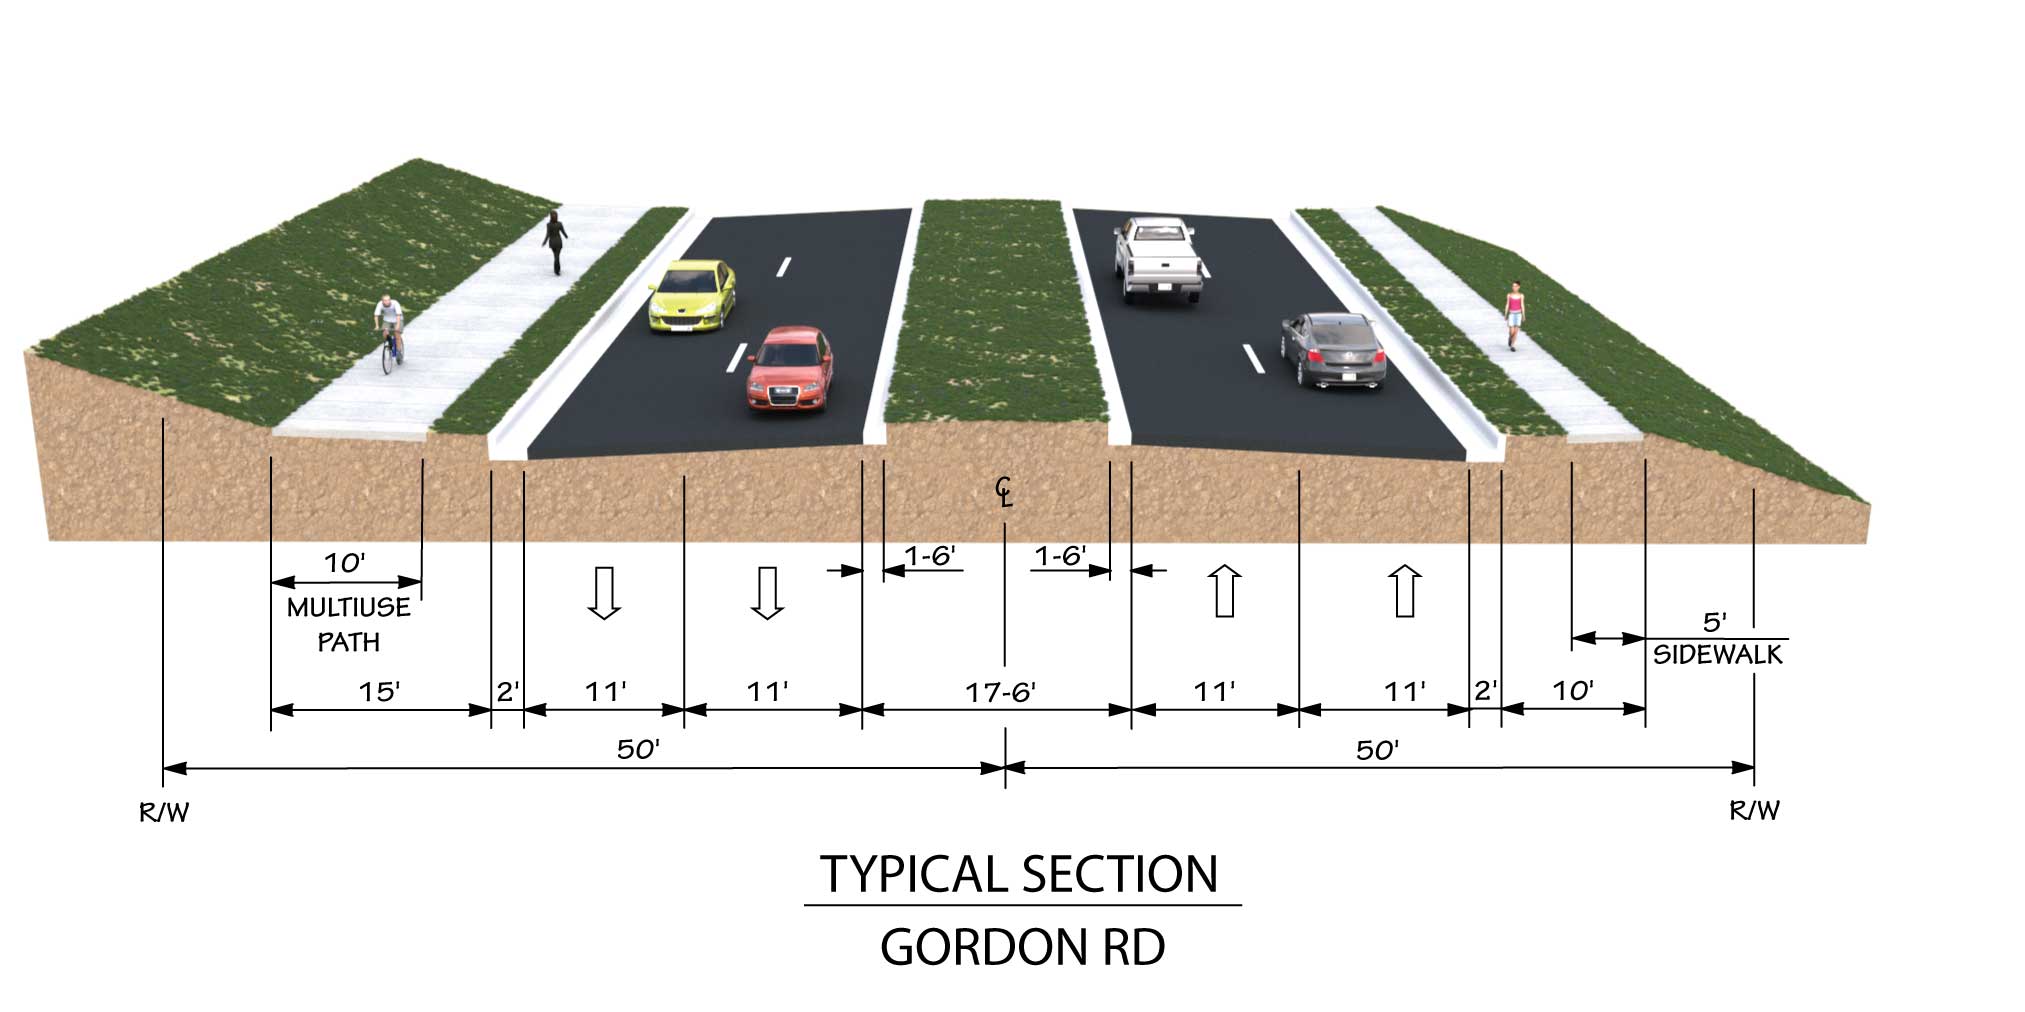 Gordon Road Typical Section